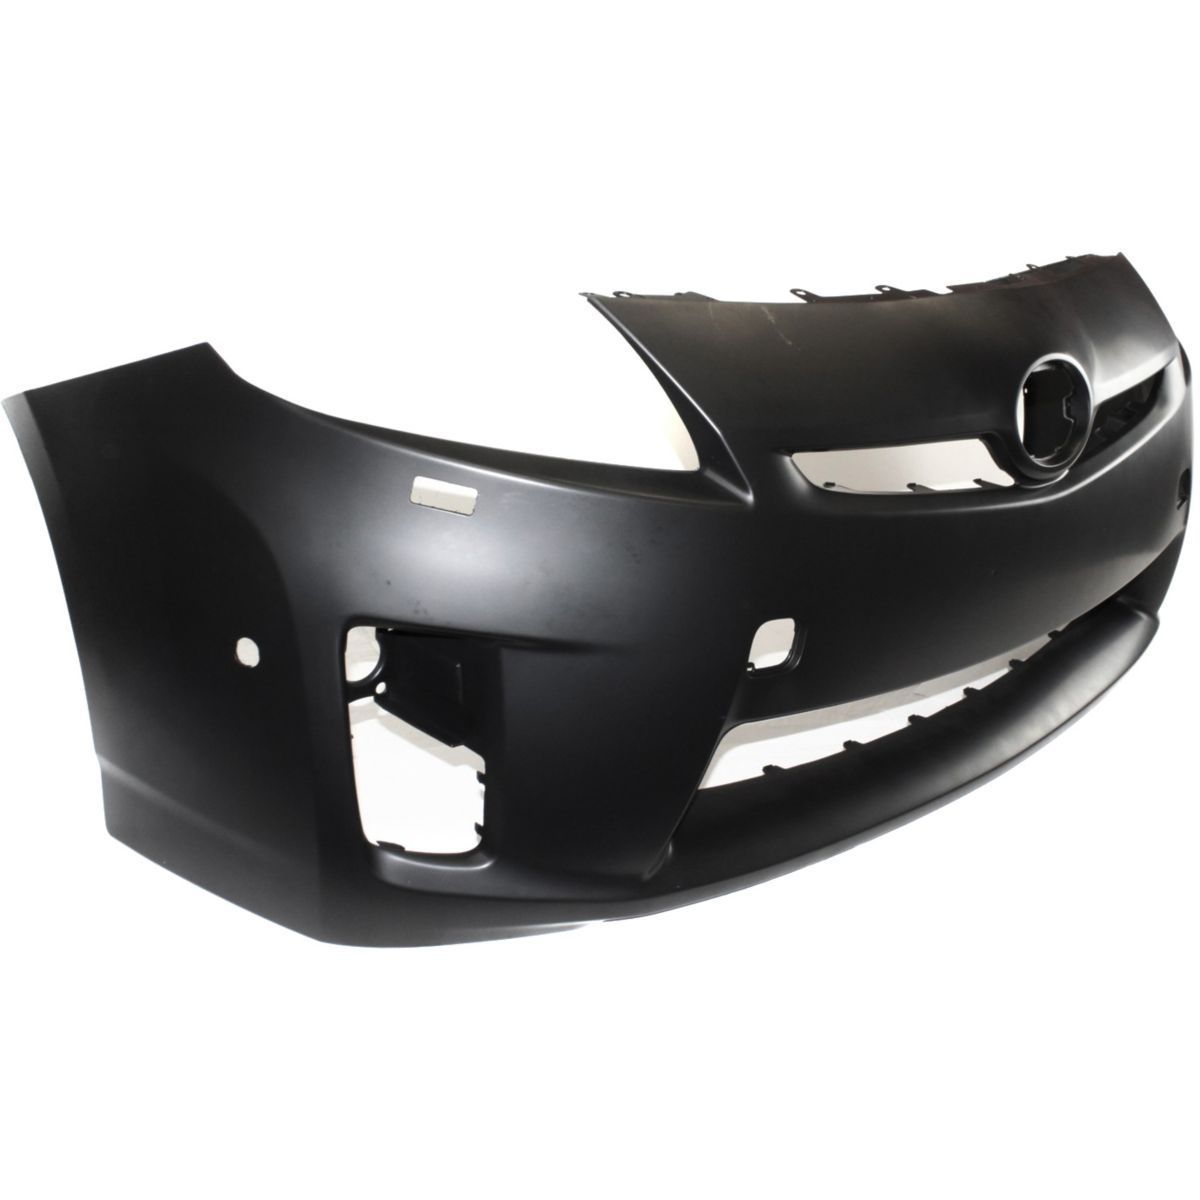 Toyota Prius 2010 - 2011 Front Bumper Cover 10 - 11 TO1000360 Bumper King